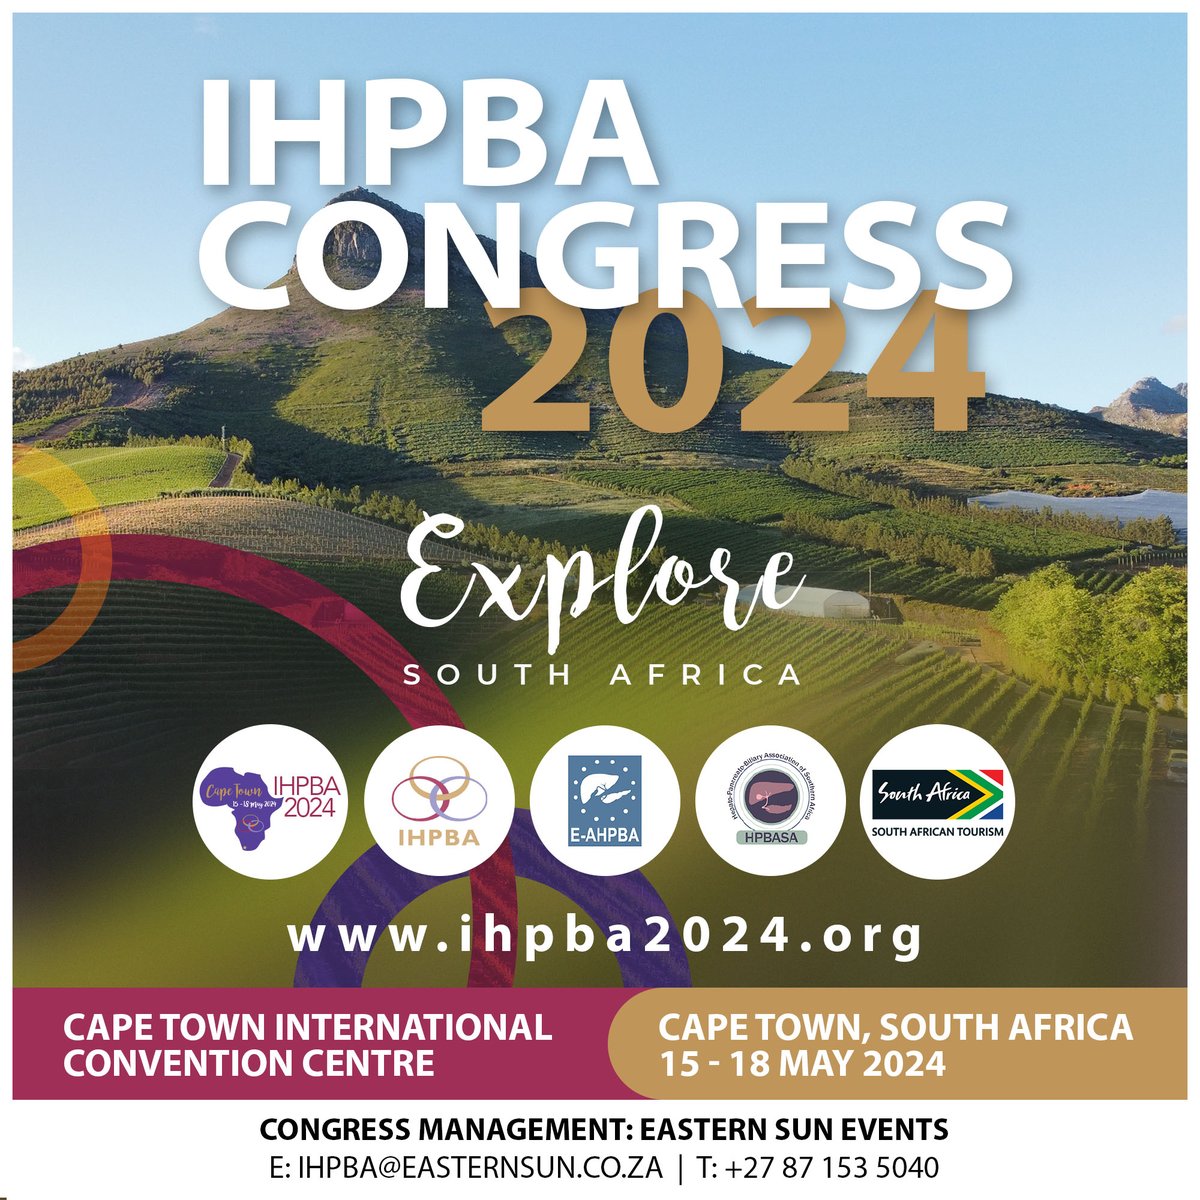 Extend your stay at The IHPBA 2024 Congress and explore one of the most beautiful cities in the world. Cape town offers visitors a host of natural wonders, glorious beaches and iconic attractions. 

To register your interest, visit ihpba2024.org

#ihpba2024 #ihpba24